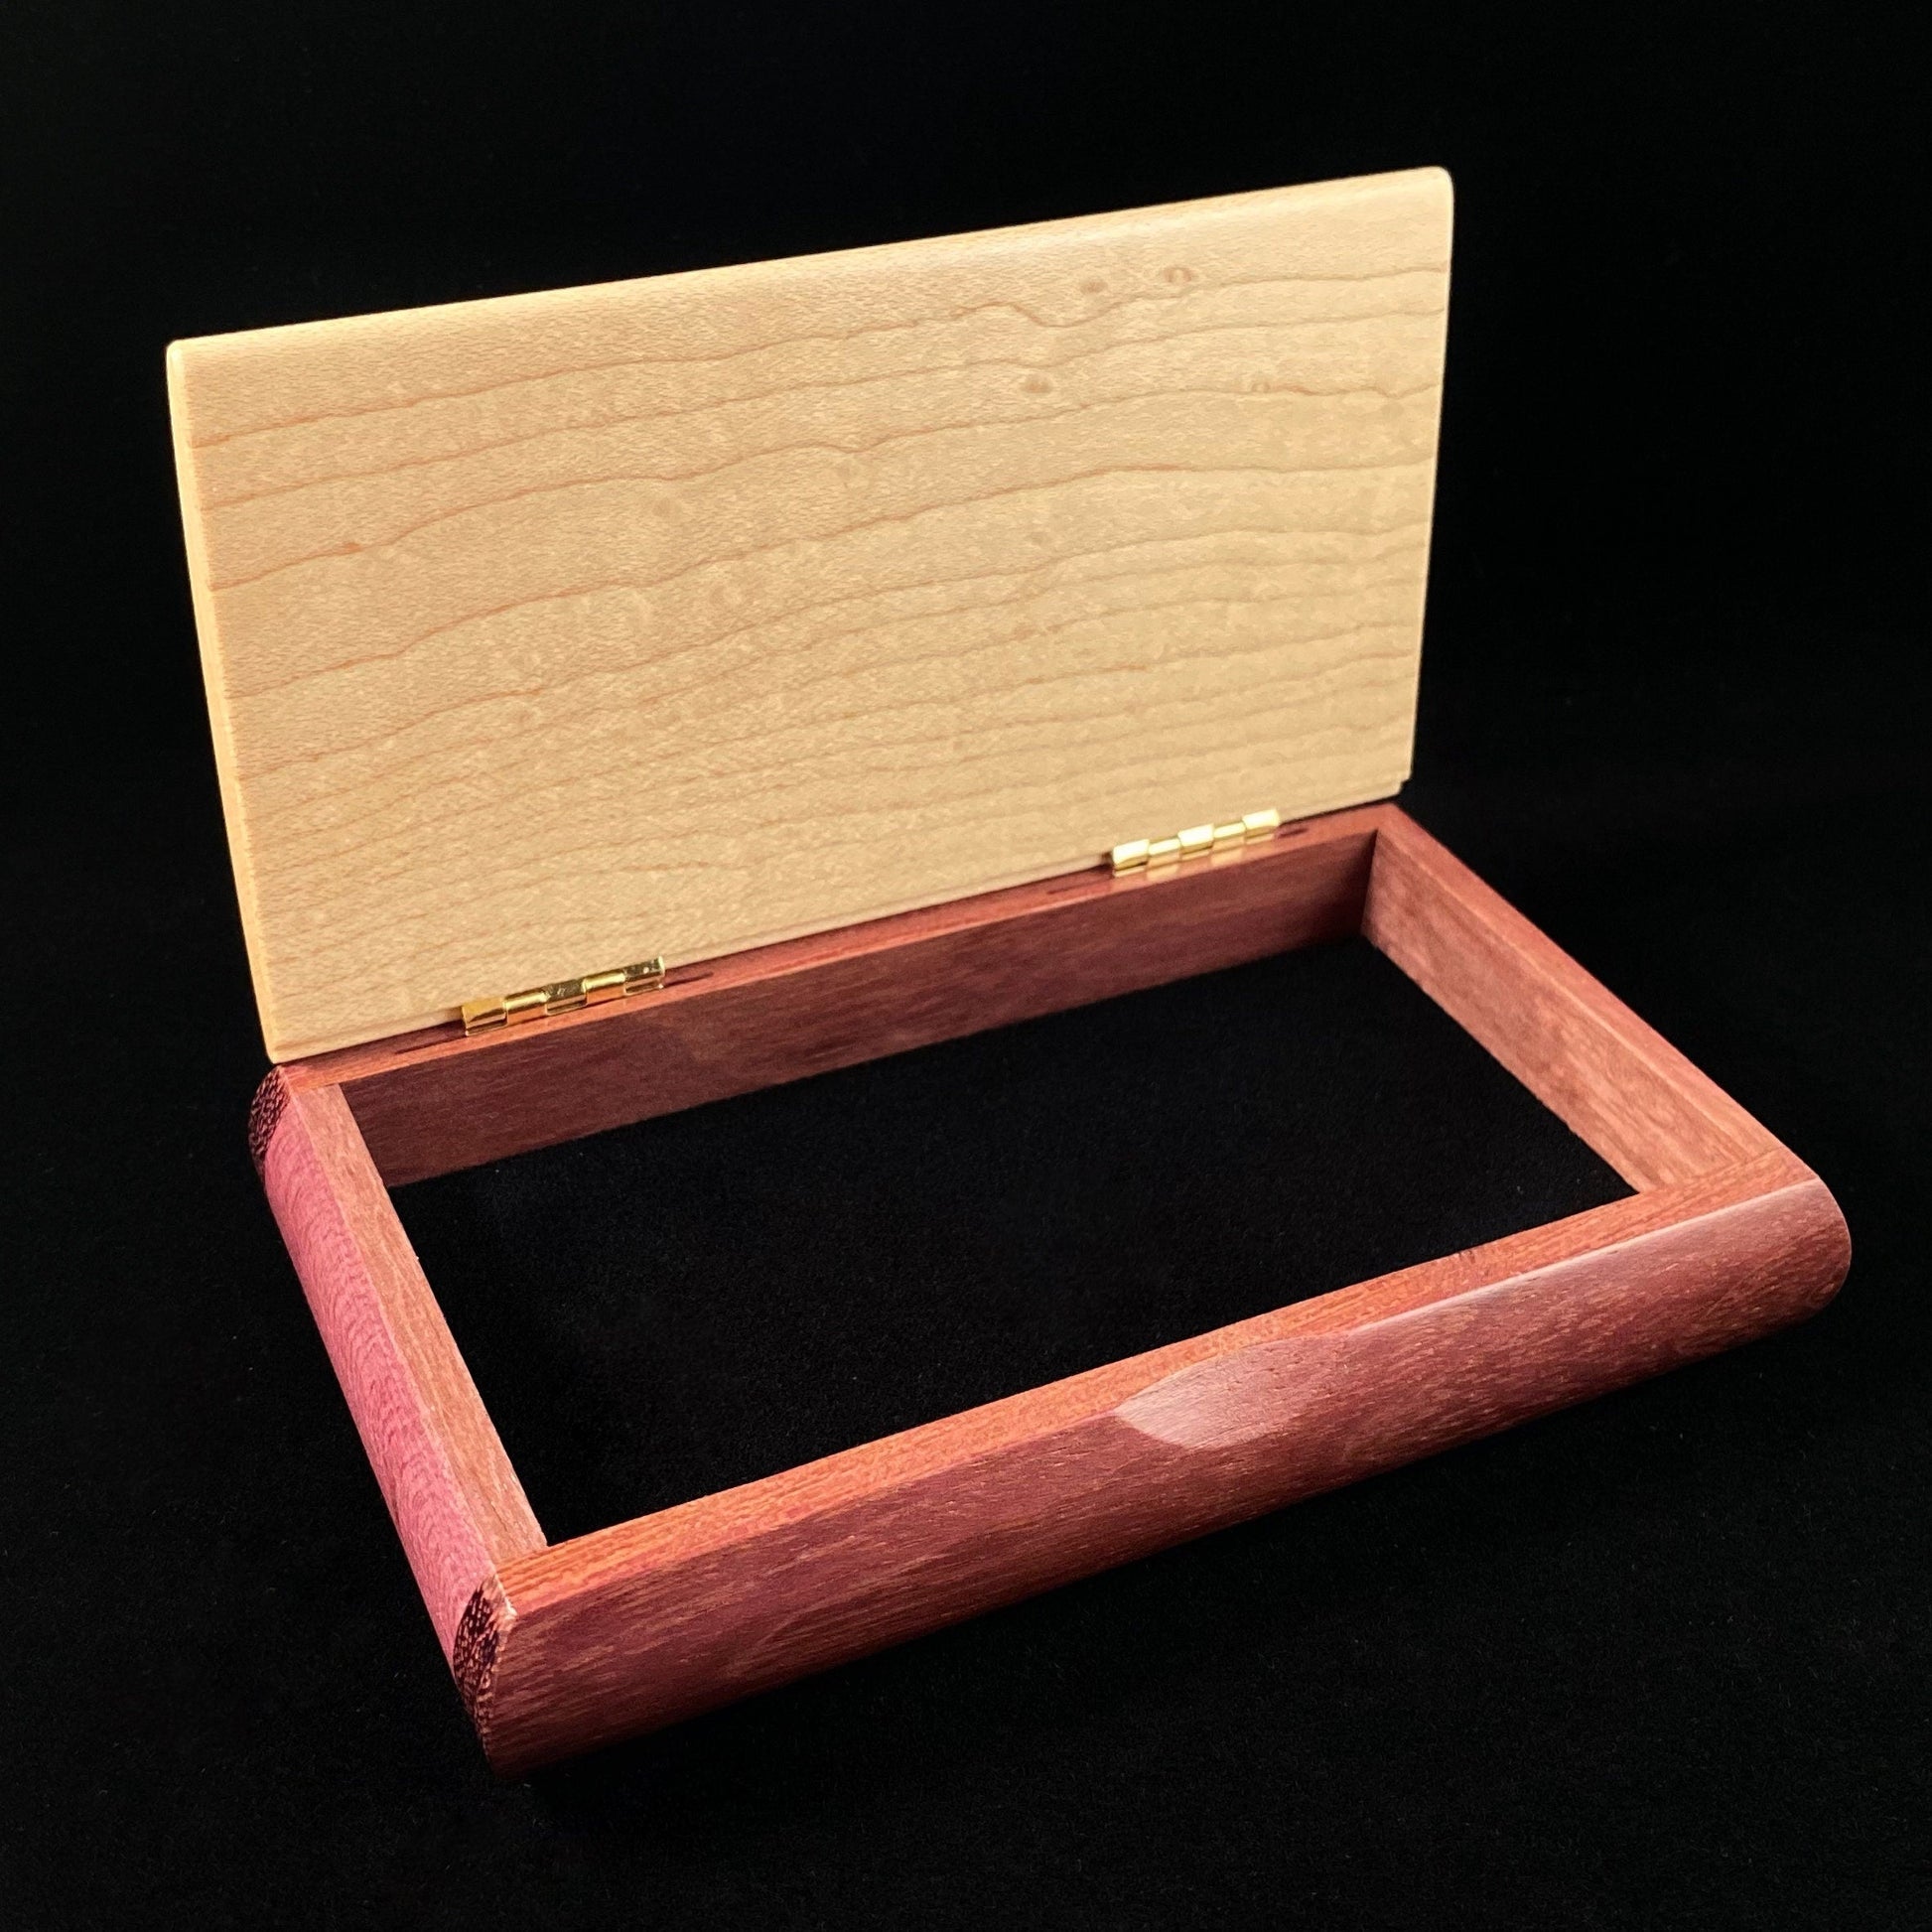 Great Lakes Handmade Wooden Box - Birdseye Maple and Purpleheart, Made in USA